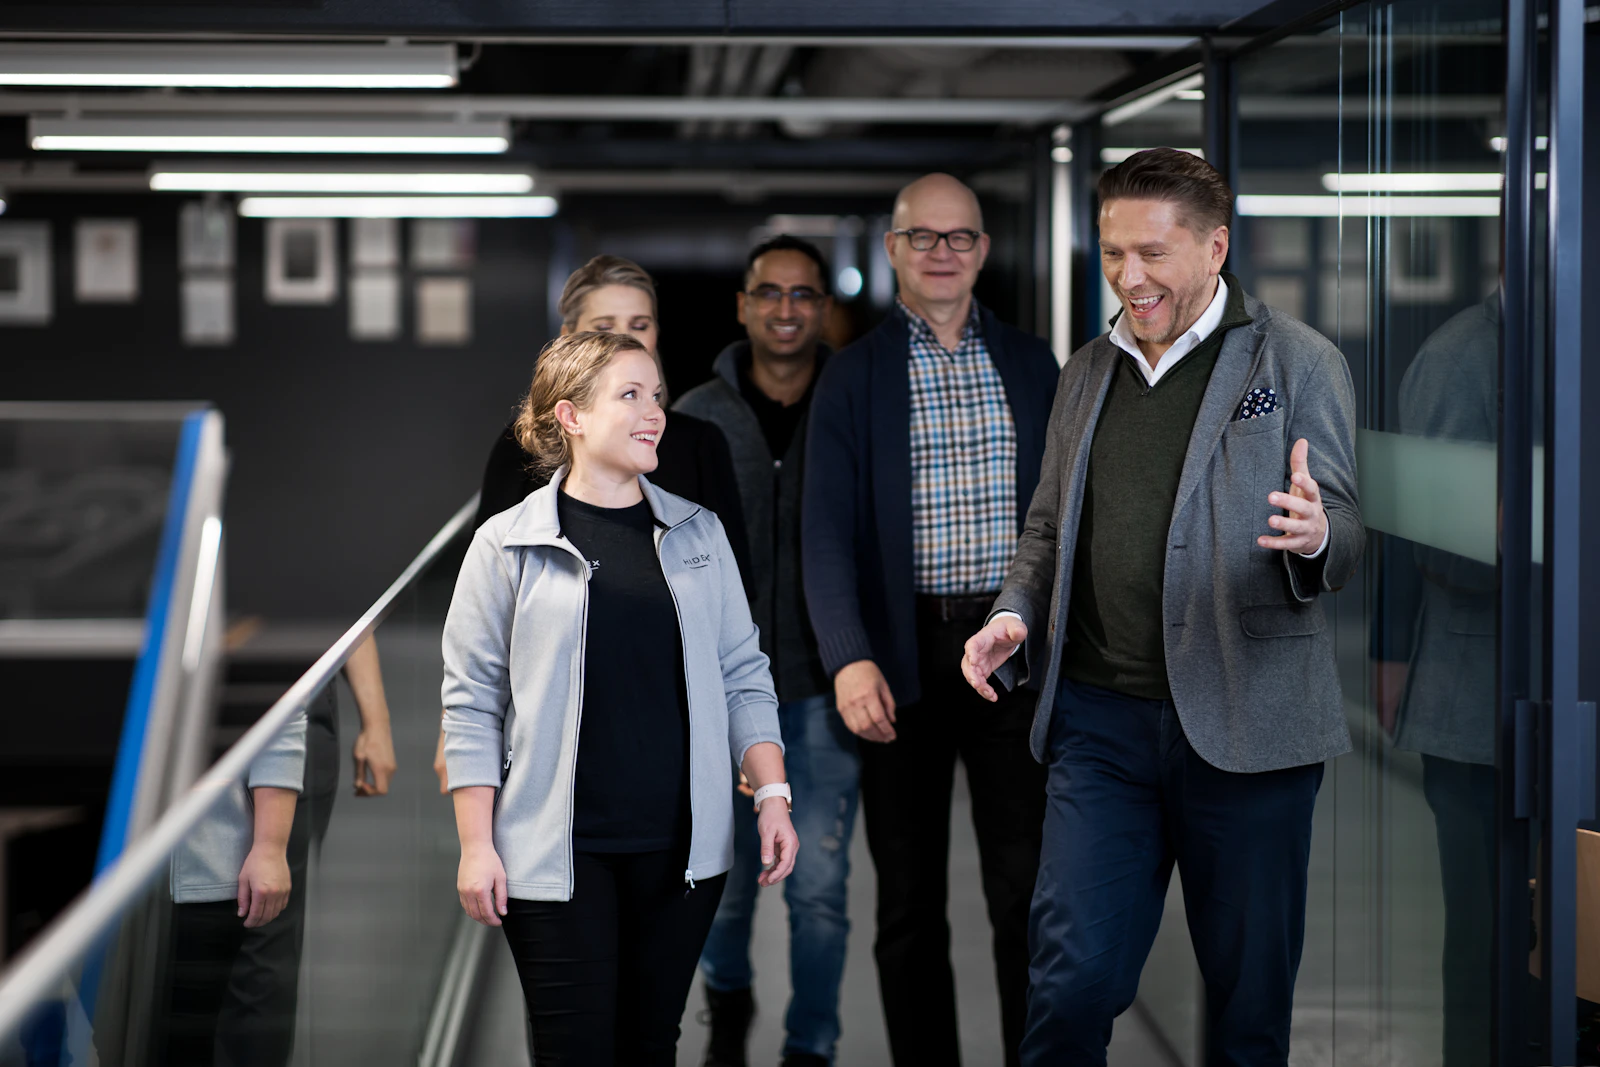 Hidex colleagues walking together in Turku office